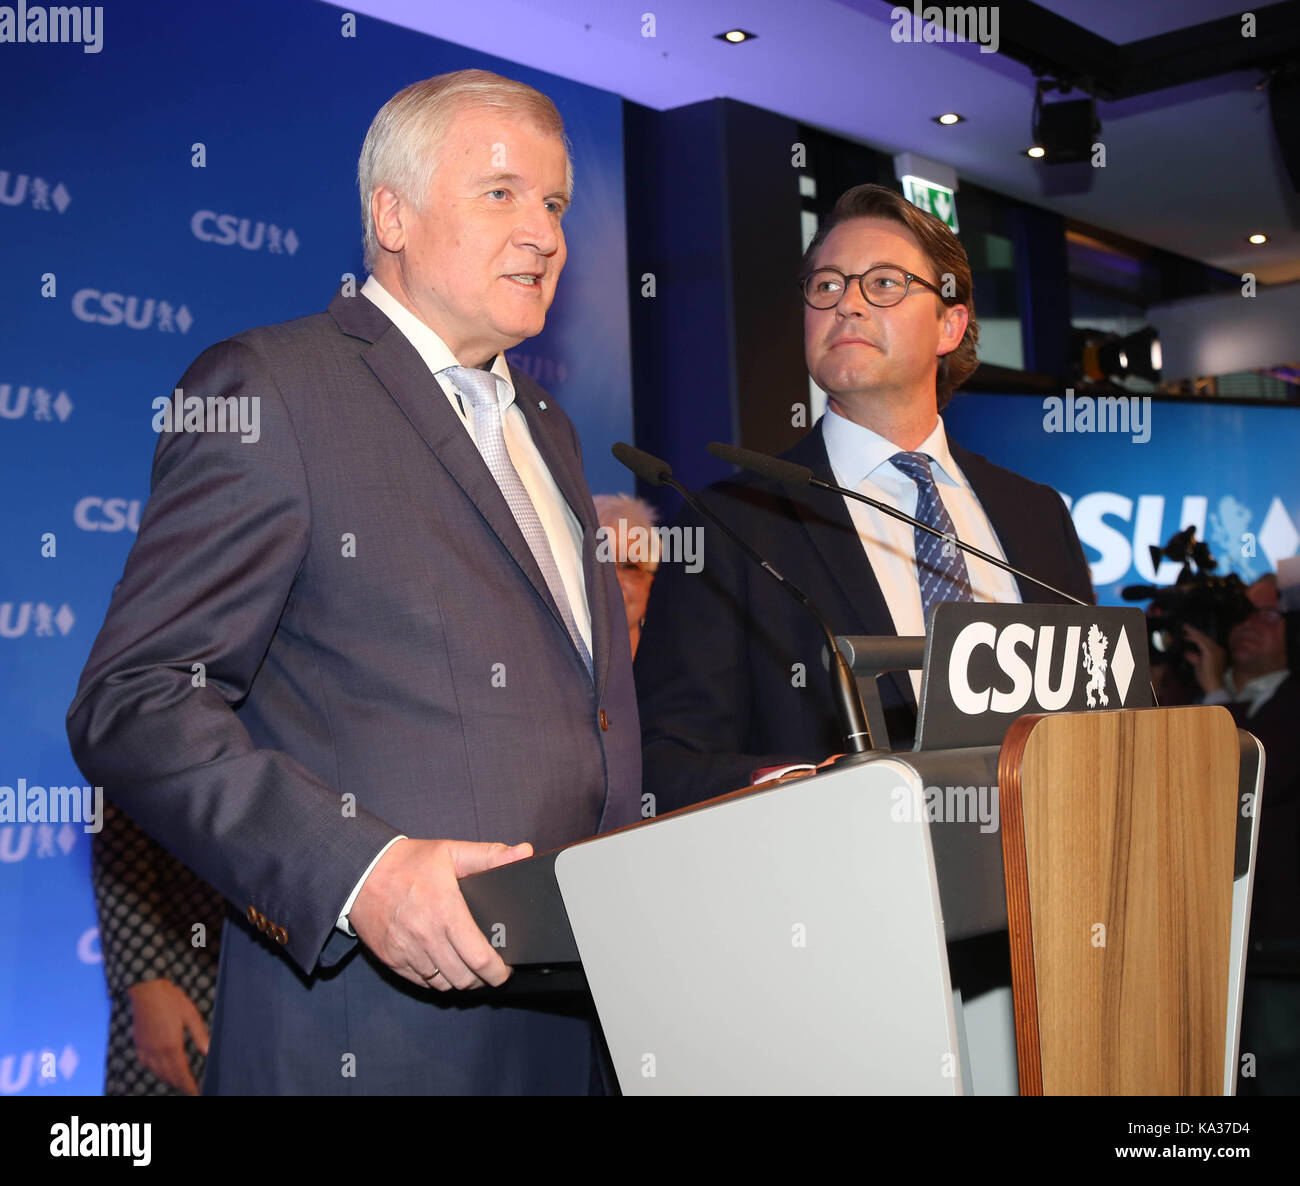 Munich, Germany. 24th Sep, 2017. Horst Seehofer (l.) and Andreas Scheuer (r.) After the election the leading bavarian party CSU (sister party of the CDU) held an election party. A few hundred guests attended the event. The CSU lost about 10% from the last result. CSU chairman Horst Seehofer held a speech, in which he admitted the heavy defeat. Credit: Alexander Pohl/Pacific Press/Alamy Live News Stock Photo